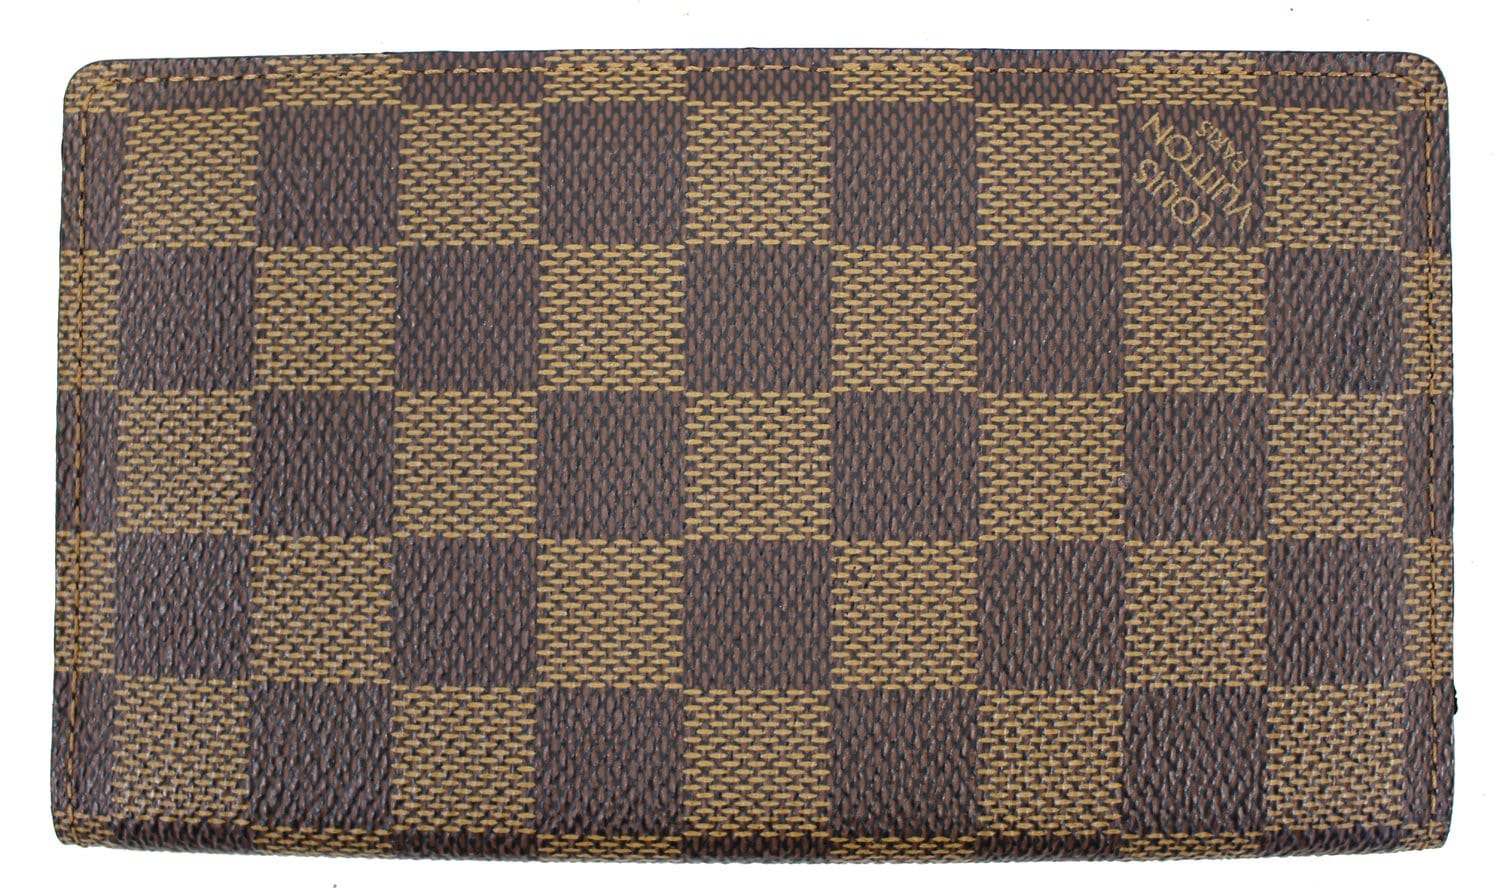 Louis Vuitton Checkbook Cover – yourvintagelvoe